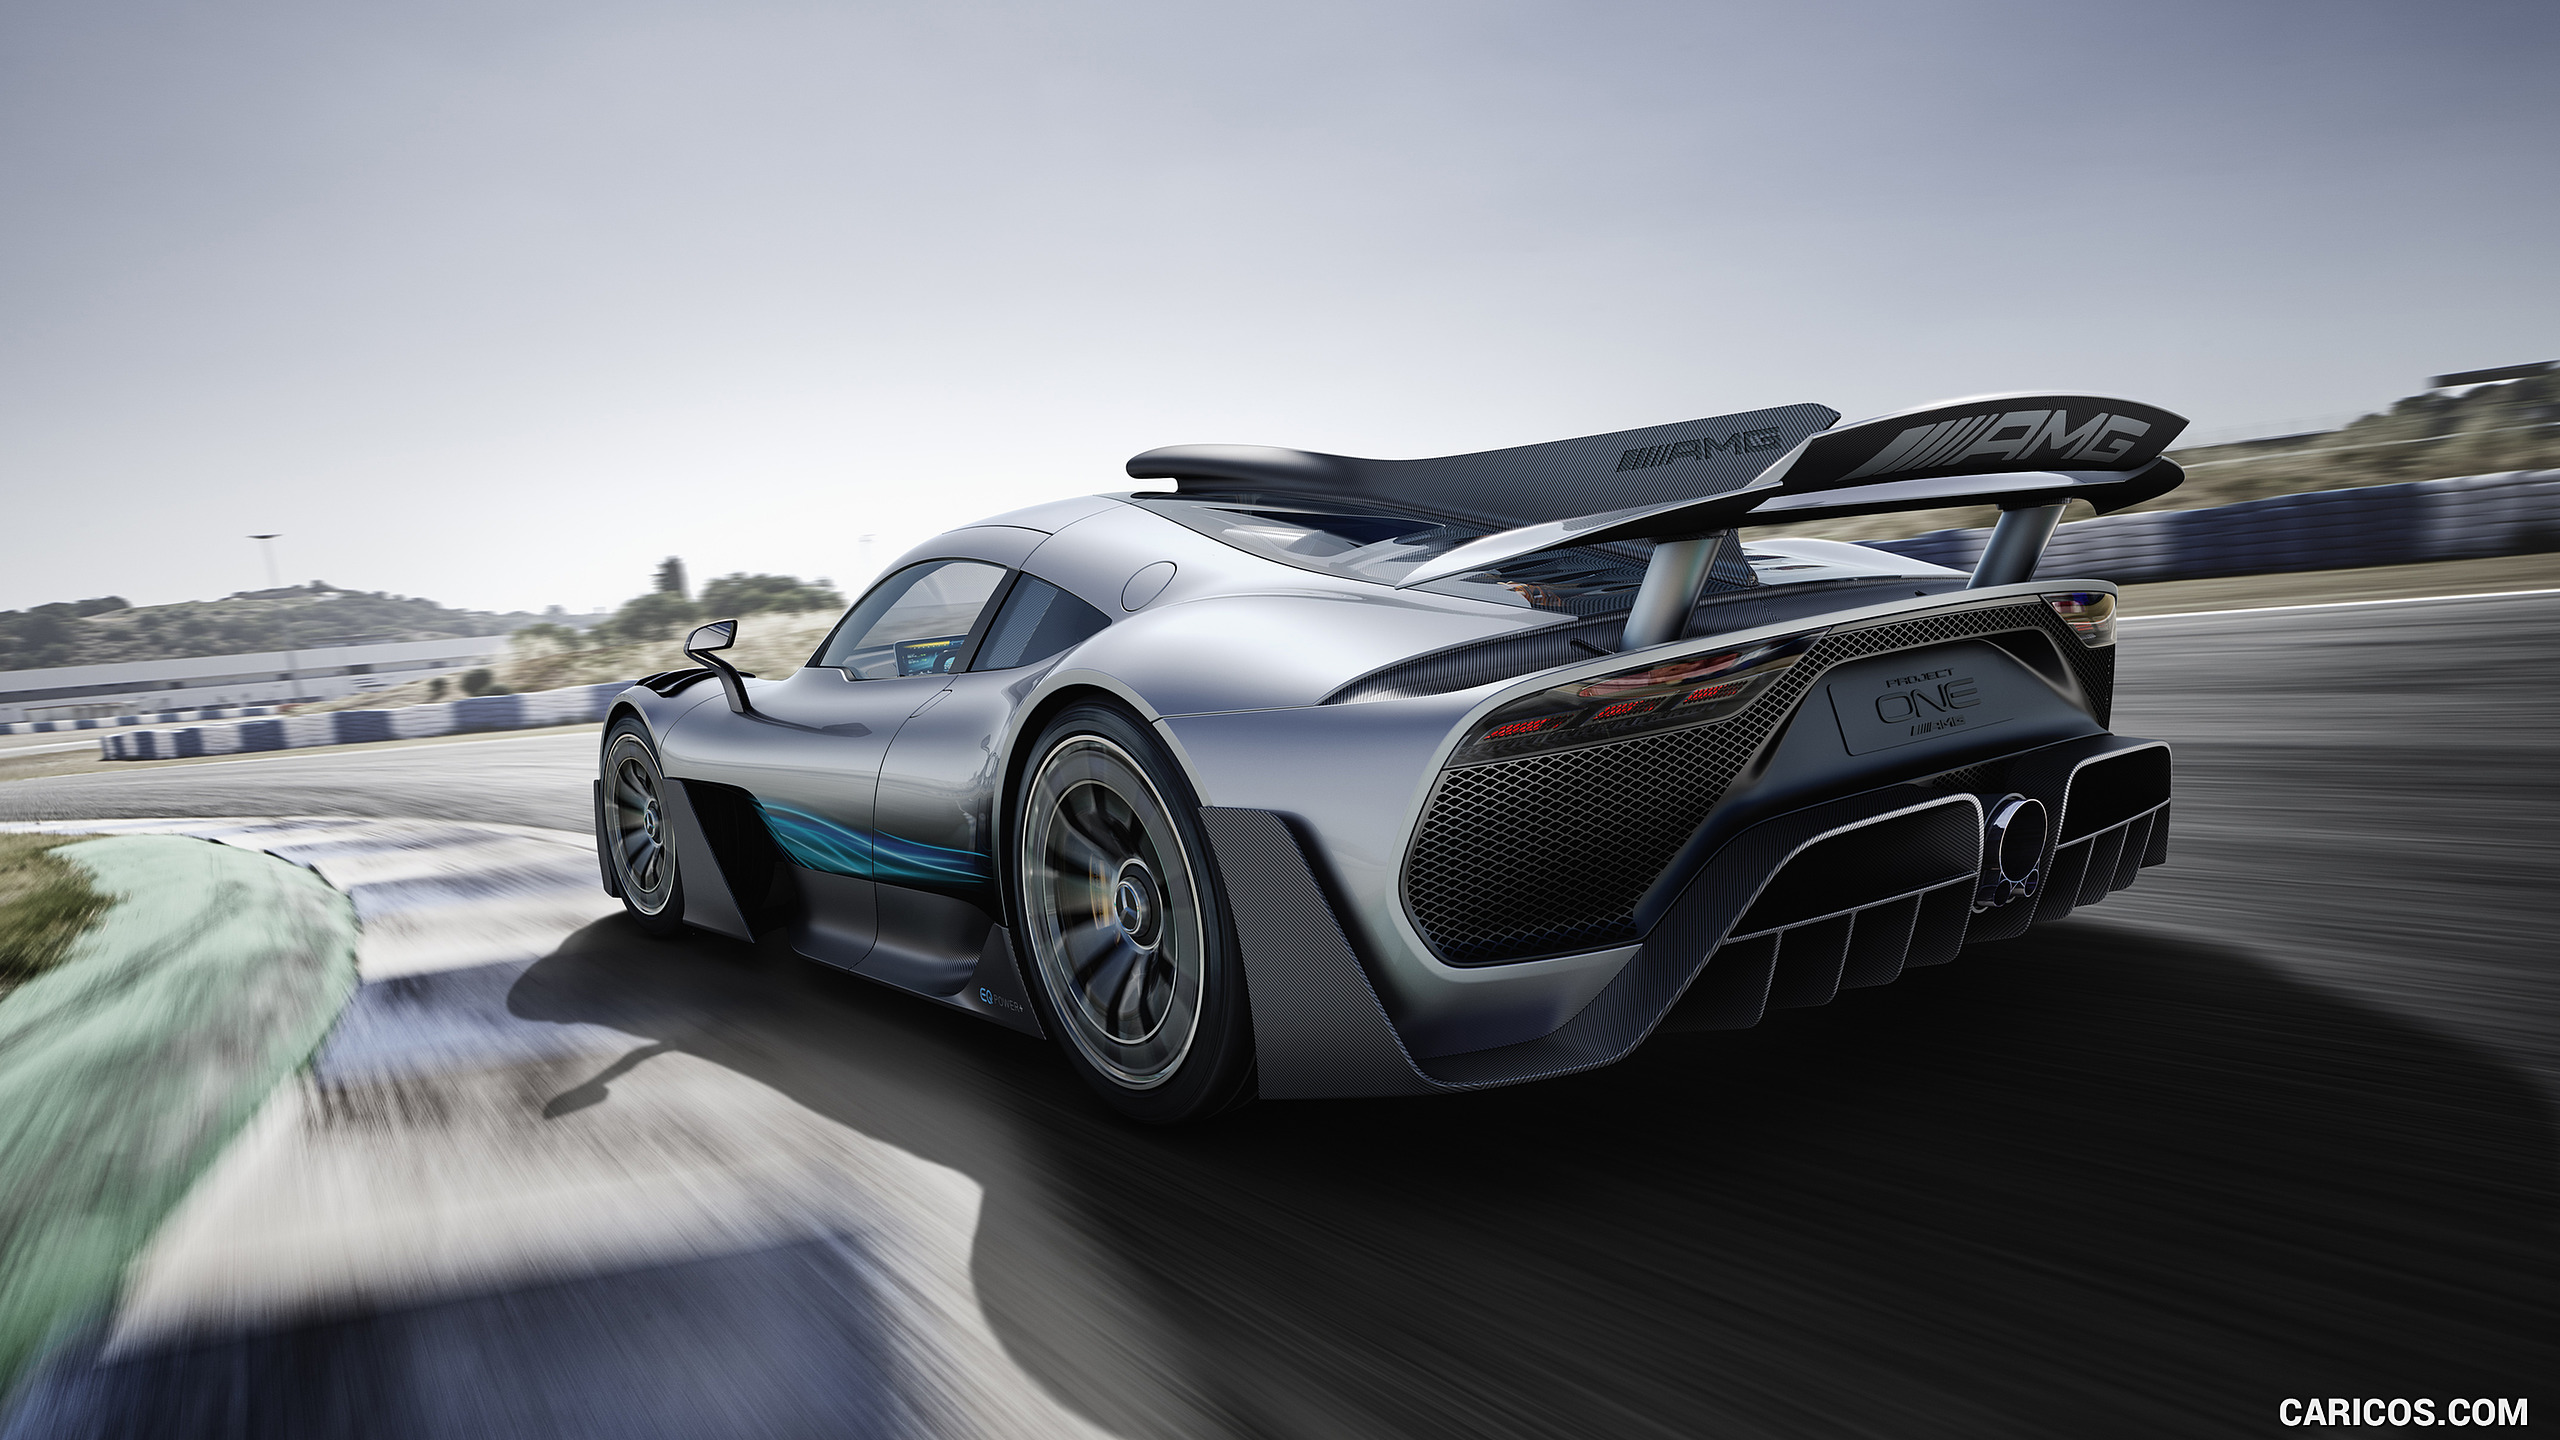 2017 Mercedes-AMG Project ONE - Rear Three-Quarter, #5 of 13